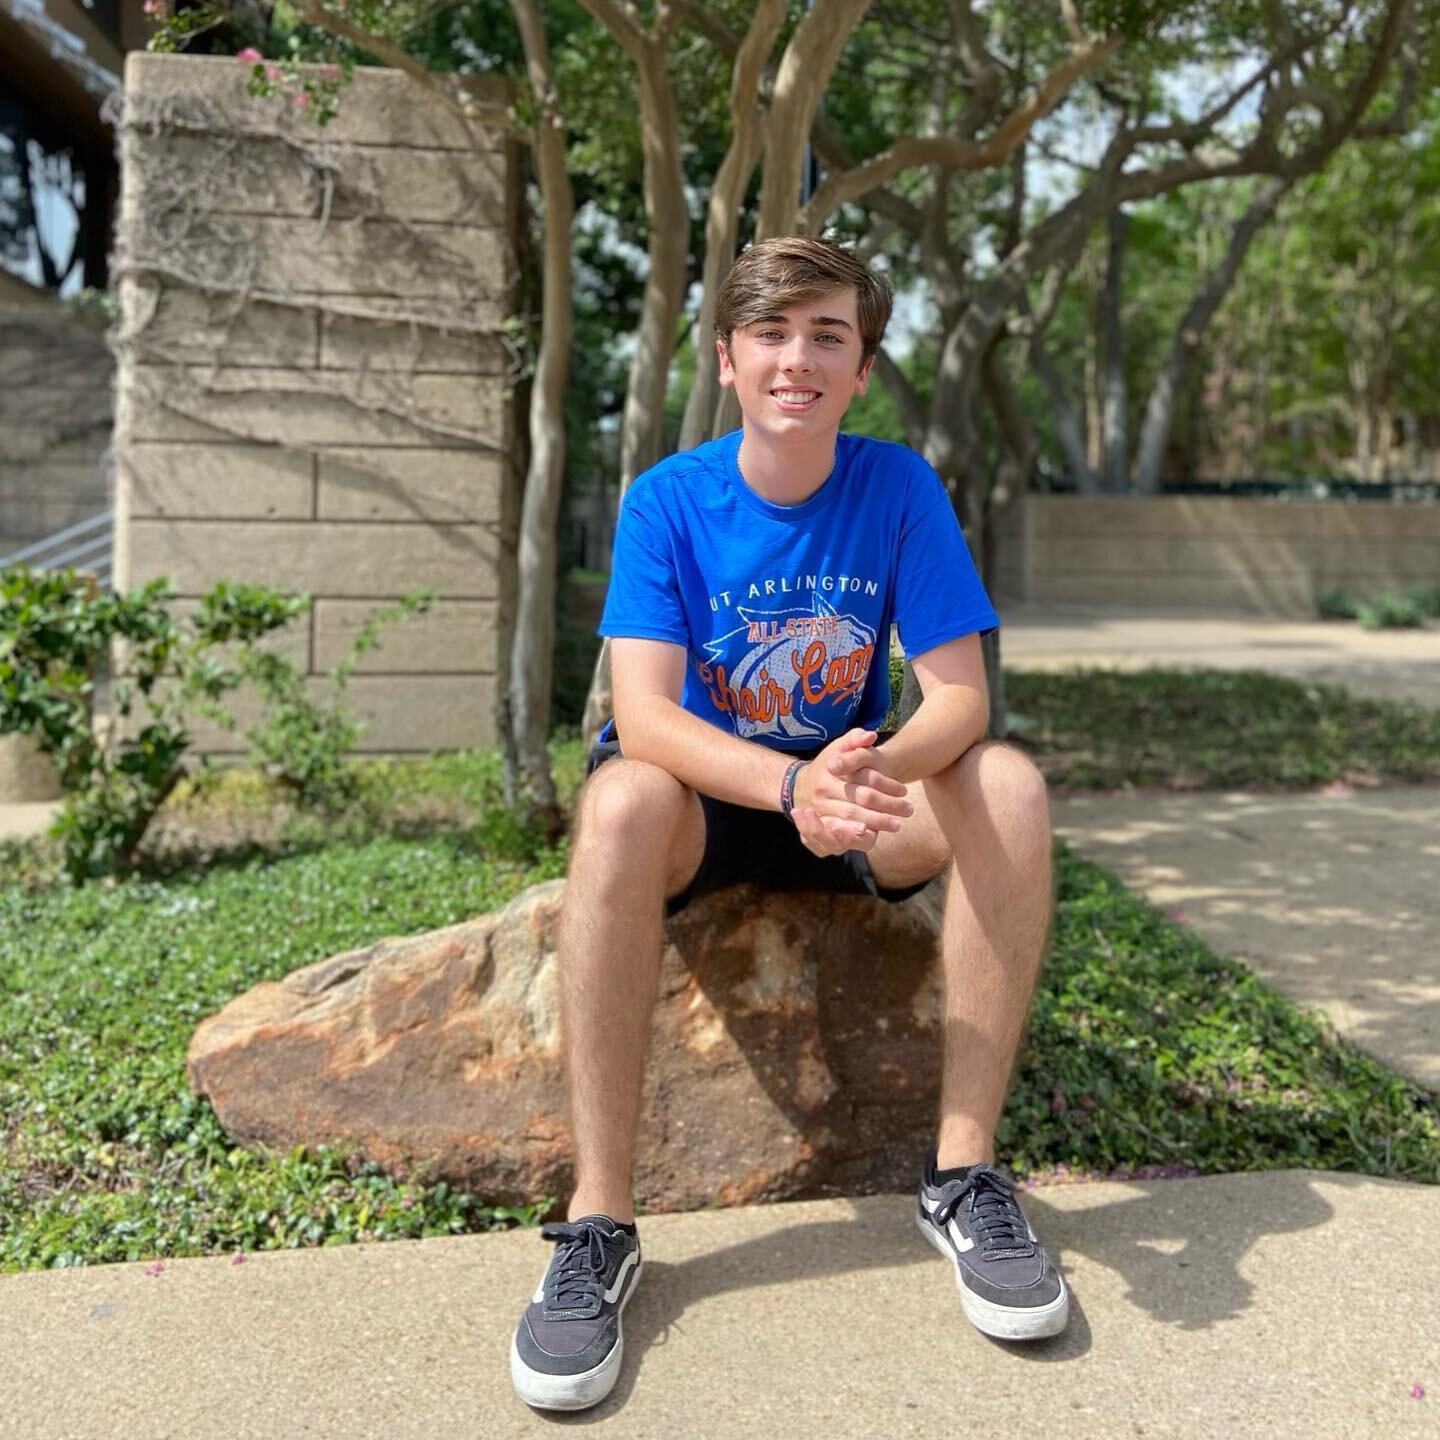 MEET CHOIR COUNCIL‼️
Daniel Tepedino is one of the Junior Reps this year! He is in Chamber, Chorale, and Varsity Show Choir. Outside of choir, Daniel is part of the leadership team in Psi Alpha as the Chapter Delegate, in the STEM academy, a Dutch Br